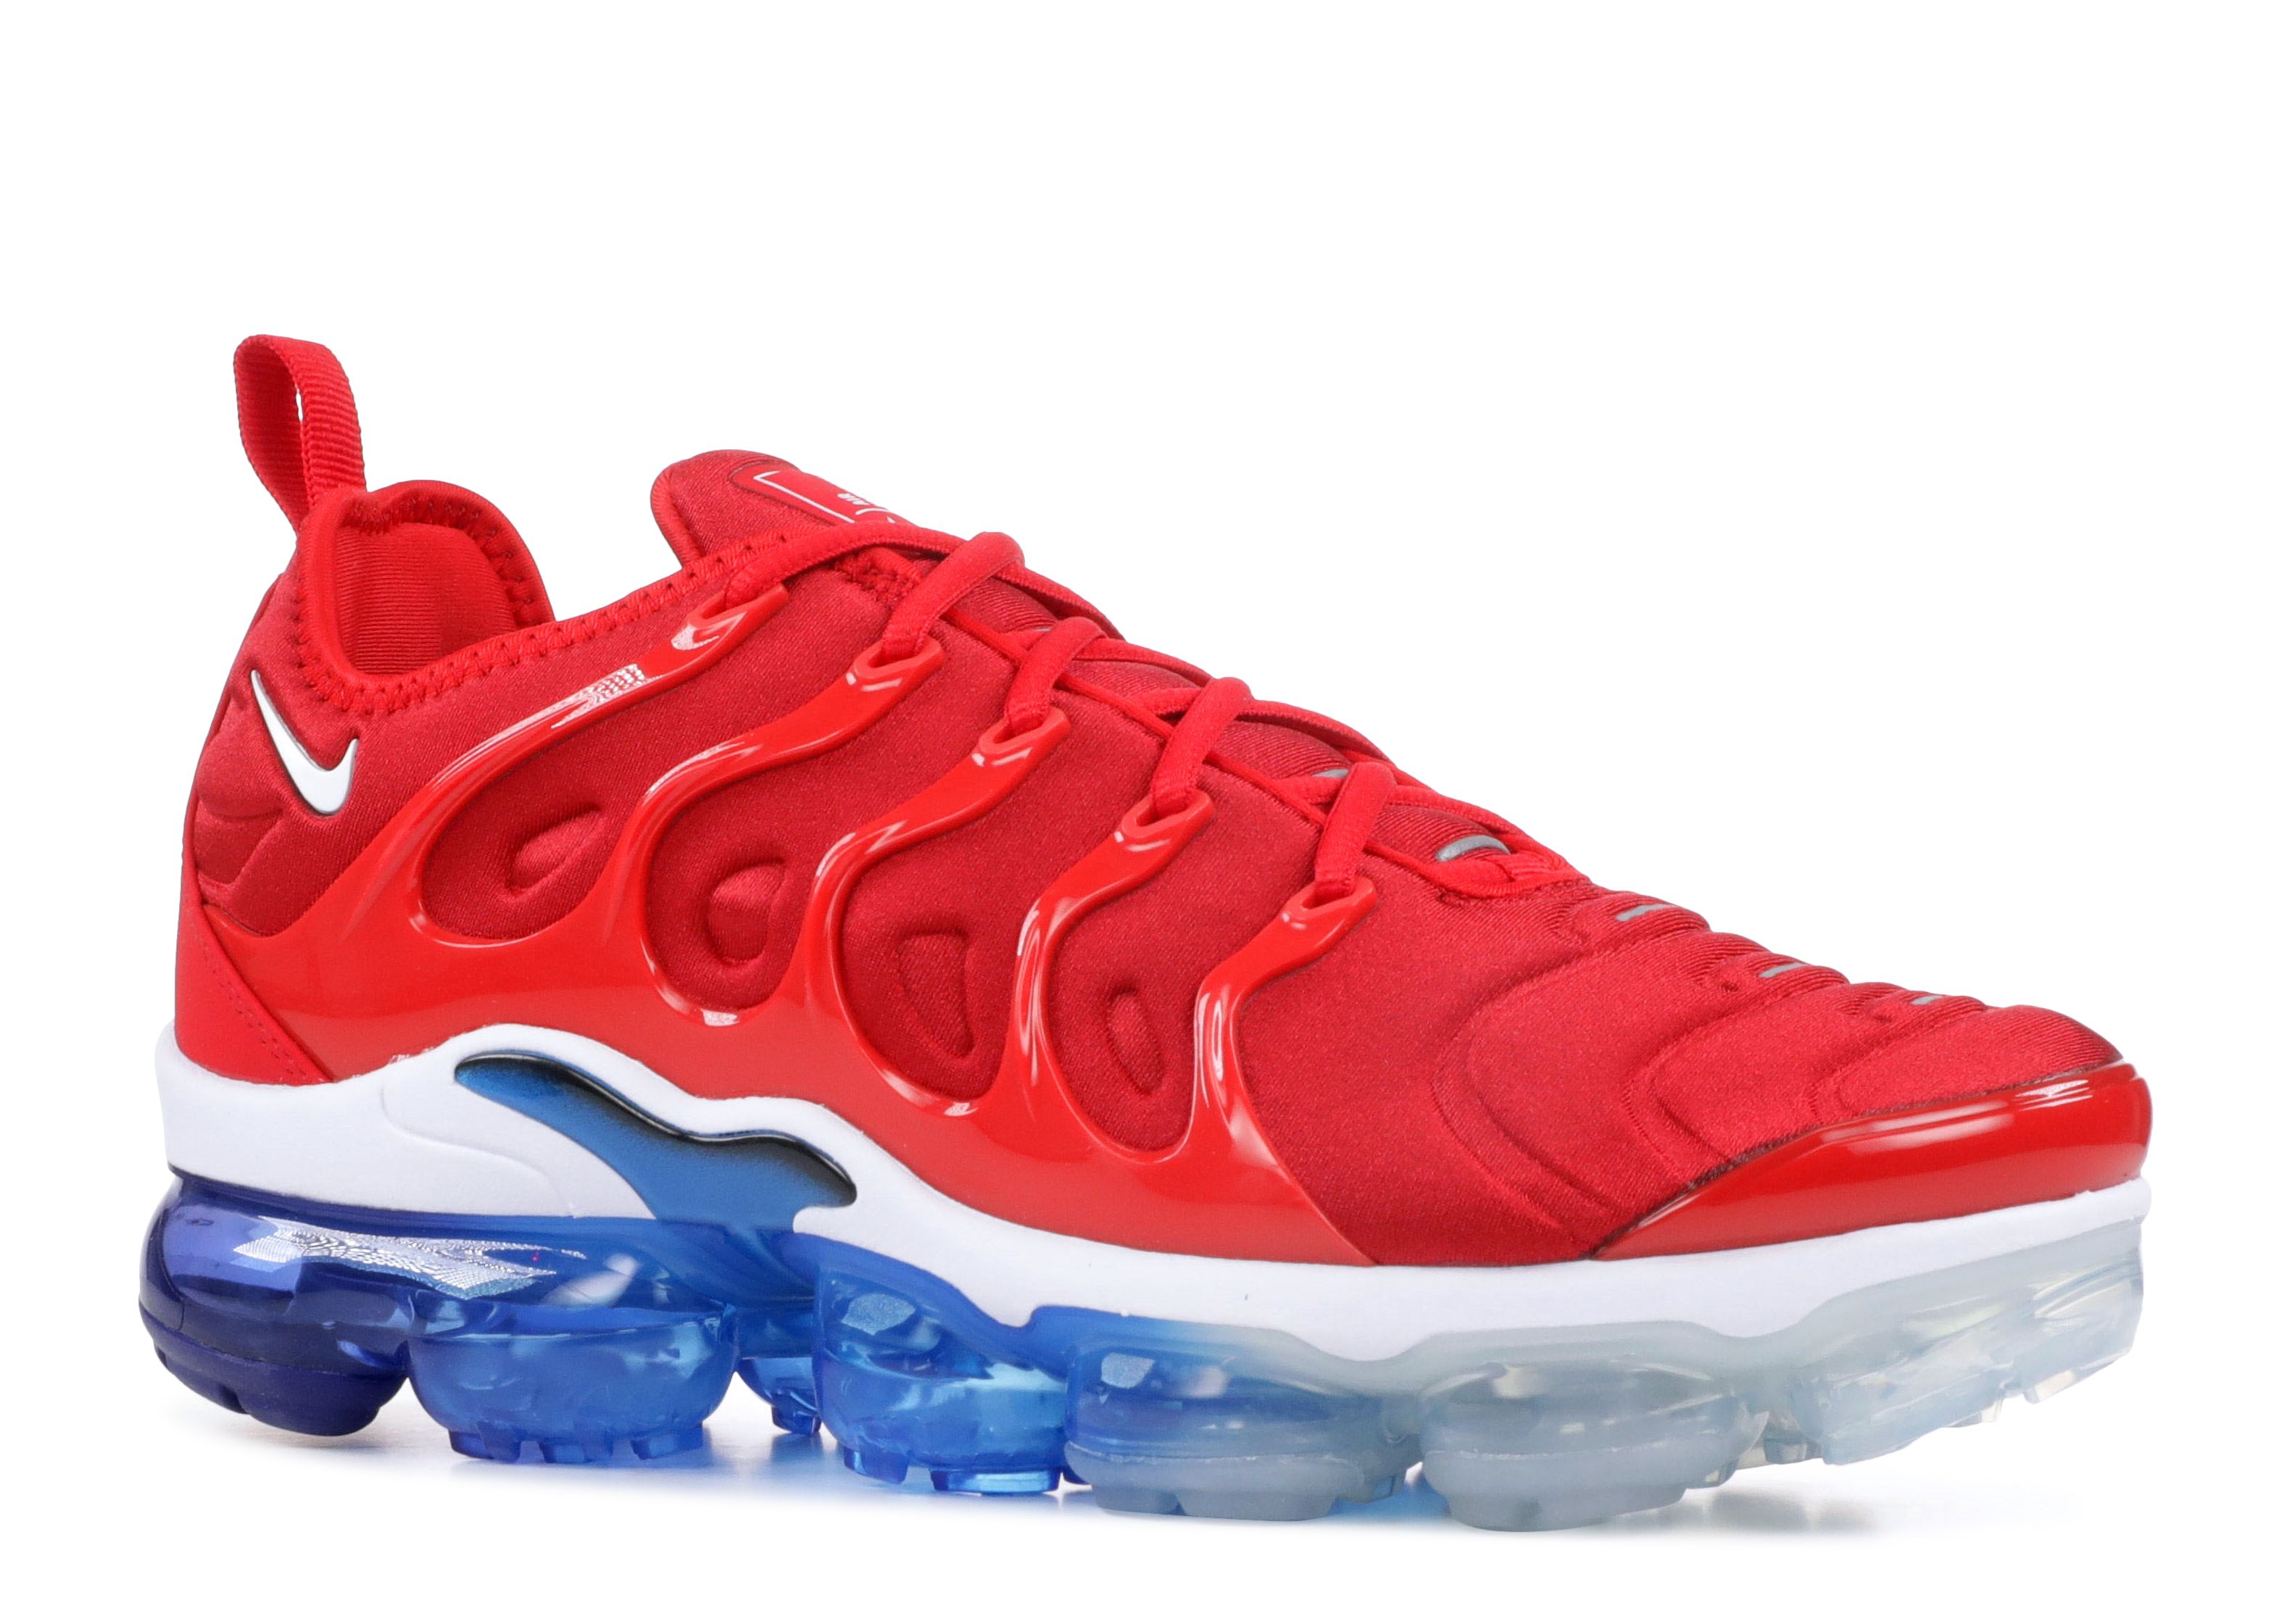 red white and blue vapormax